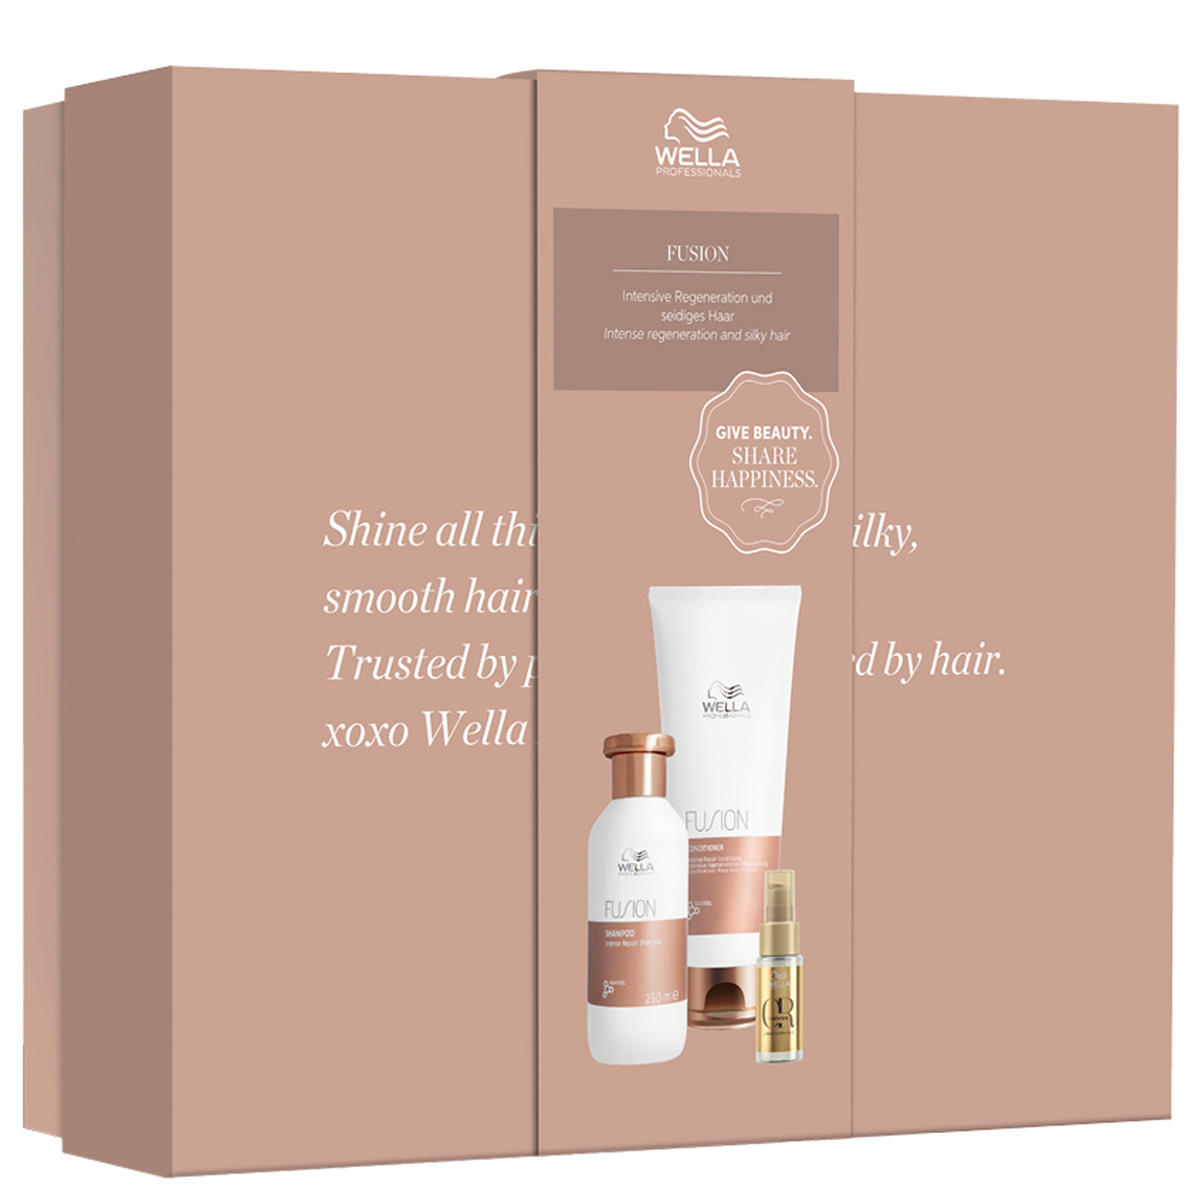 Wella FUSION Gift box for damaged and stressed hair  - 1